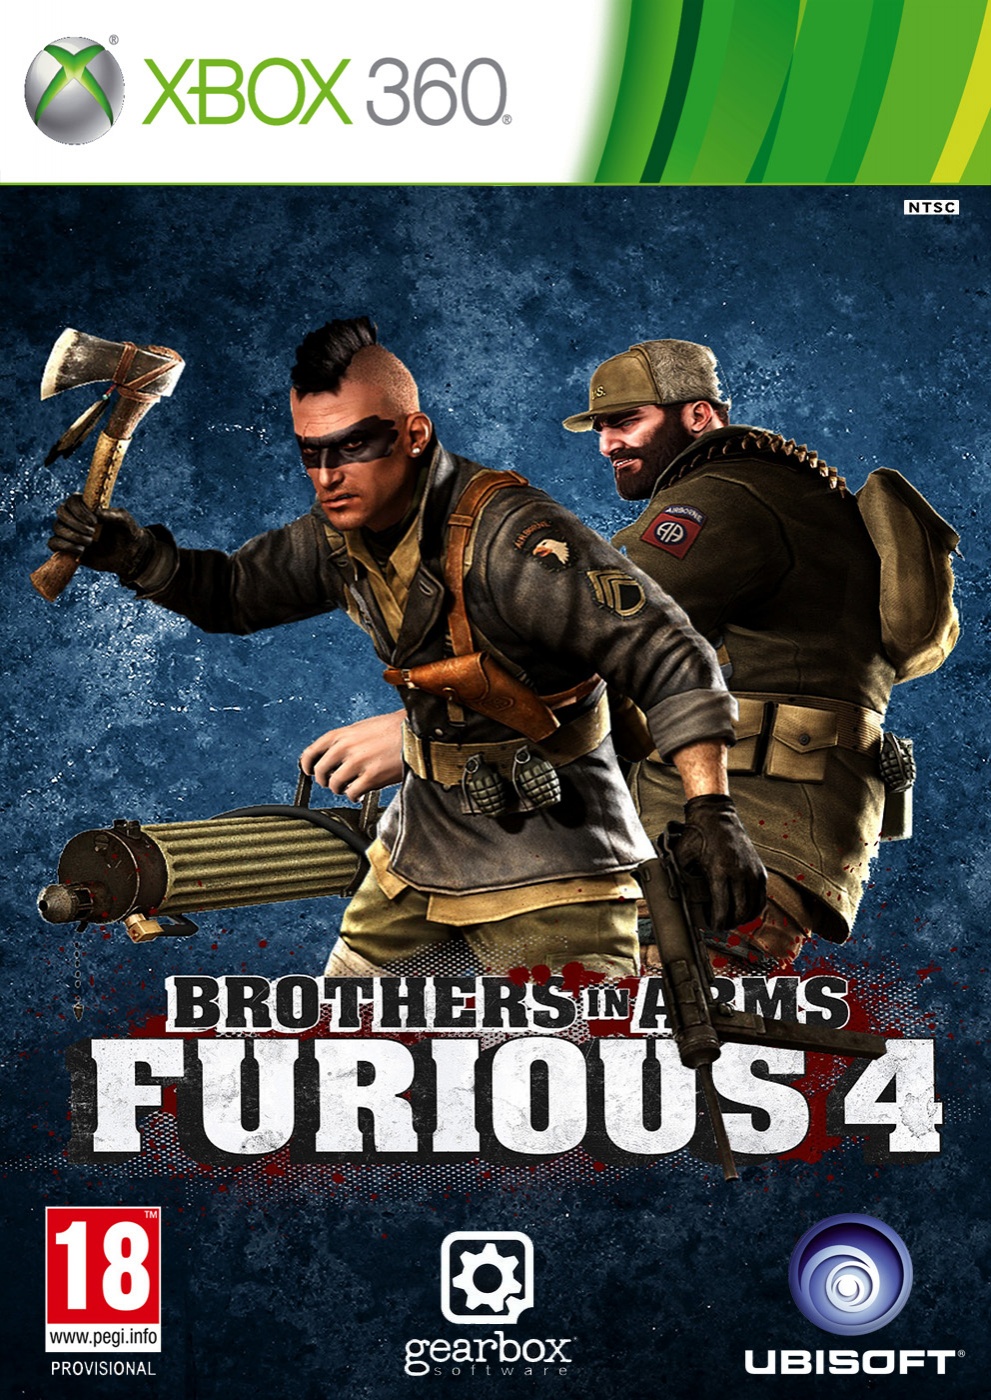 Brothers in Arms: Furious box cover